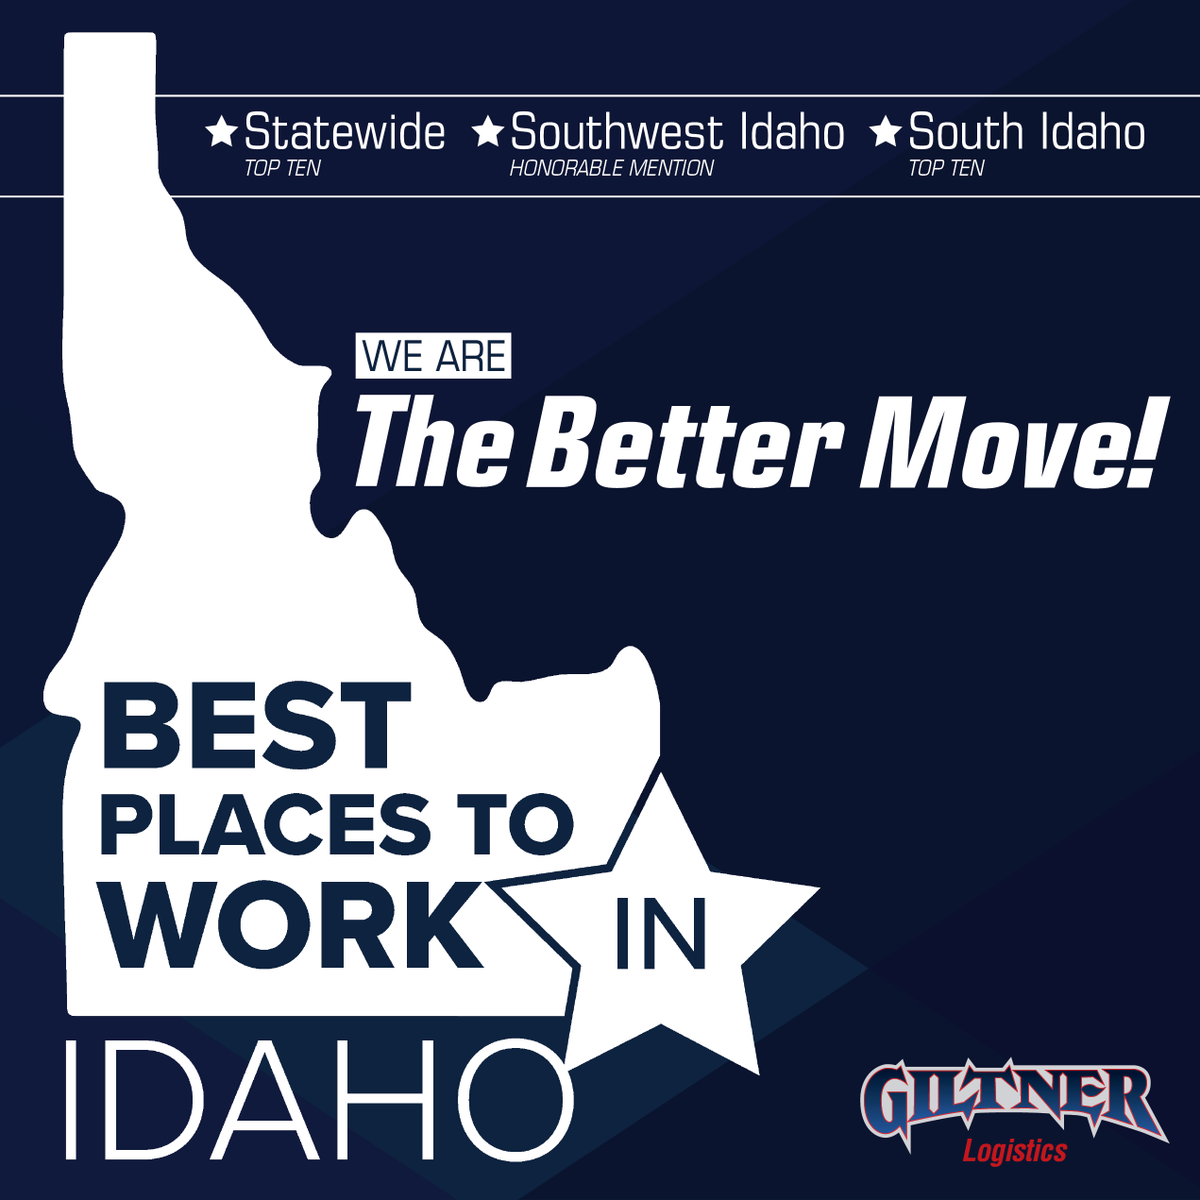 We are deeply honored to be named one of the top ten #BestPlacesToWork in Idaho by our incredible employees, thank you!! 🏆#LiterallyCouldntDoItWithoutYou #WereHiring #JoinOurTeam #GoWithGiltner #GiltnerGoesFurther #GiltnerTeam #Teamwork #KeepAmericaMoving #Giltner #TheBetterMove